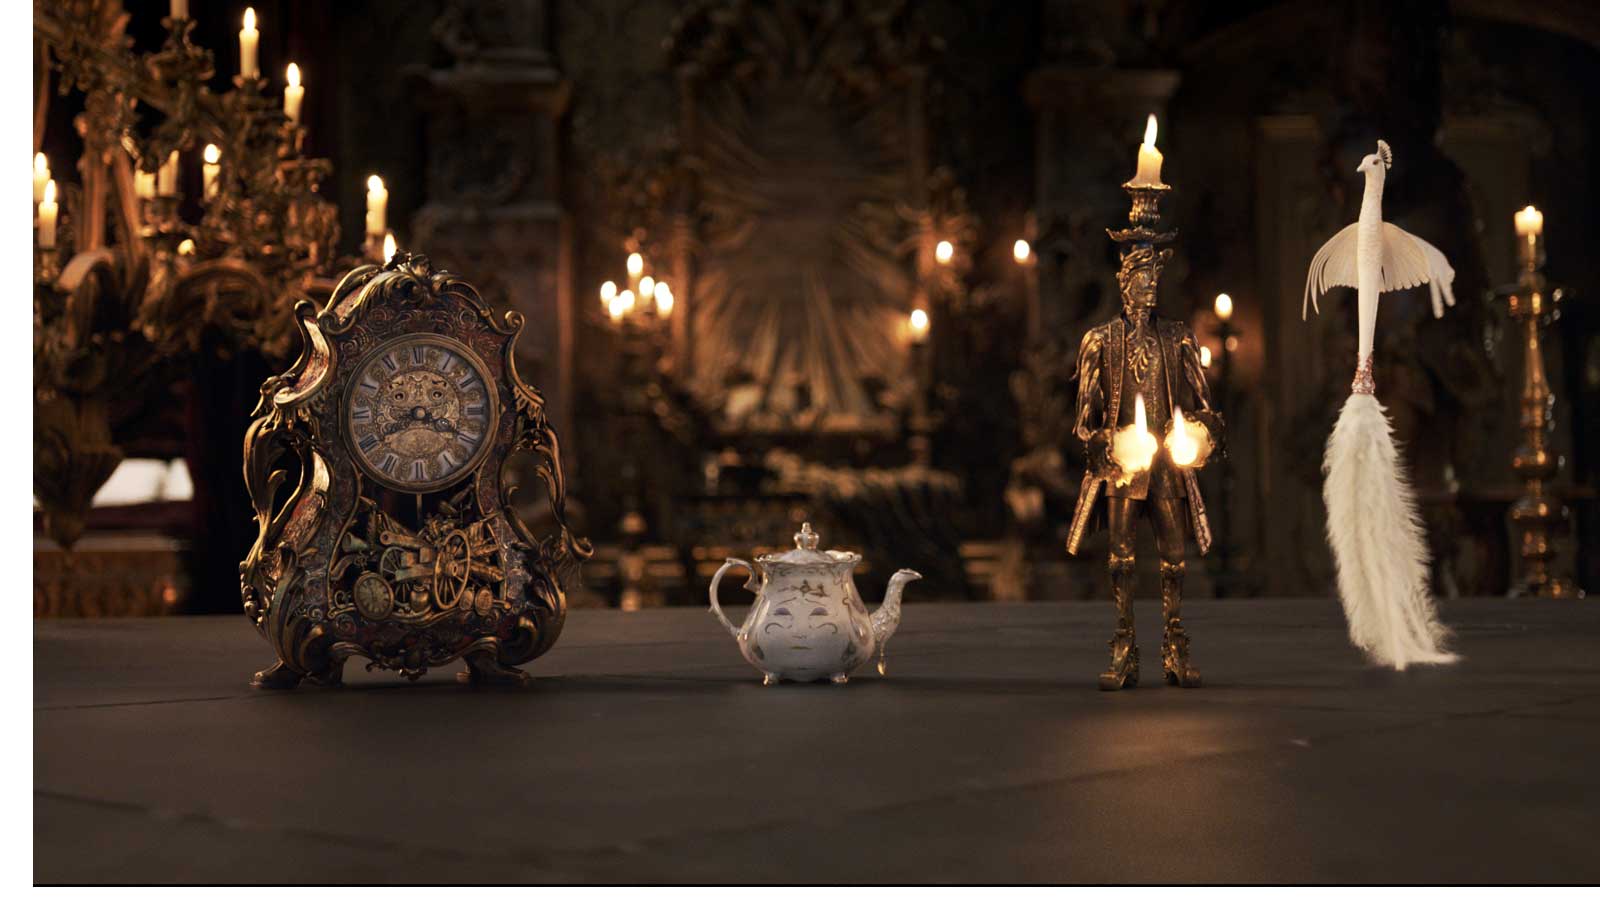 The mantel clock Cogsworth, the teapot Mrs. Potts, Lumiere the candelabra and the feather duster Plumette live in an enchanted castle in Disney's BEAUTY AND THE BEAST the live-action adaptation of the studio's animated classic directed by Bill Condon.